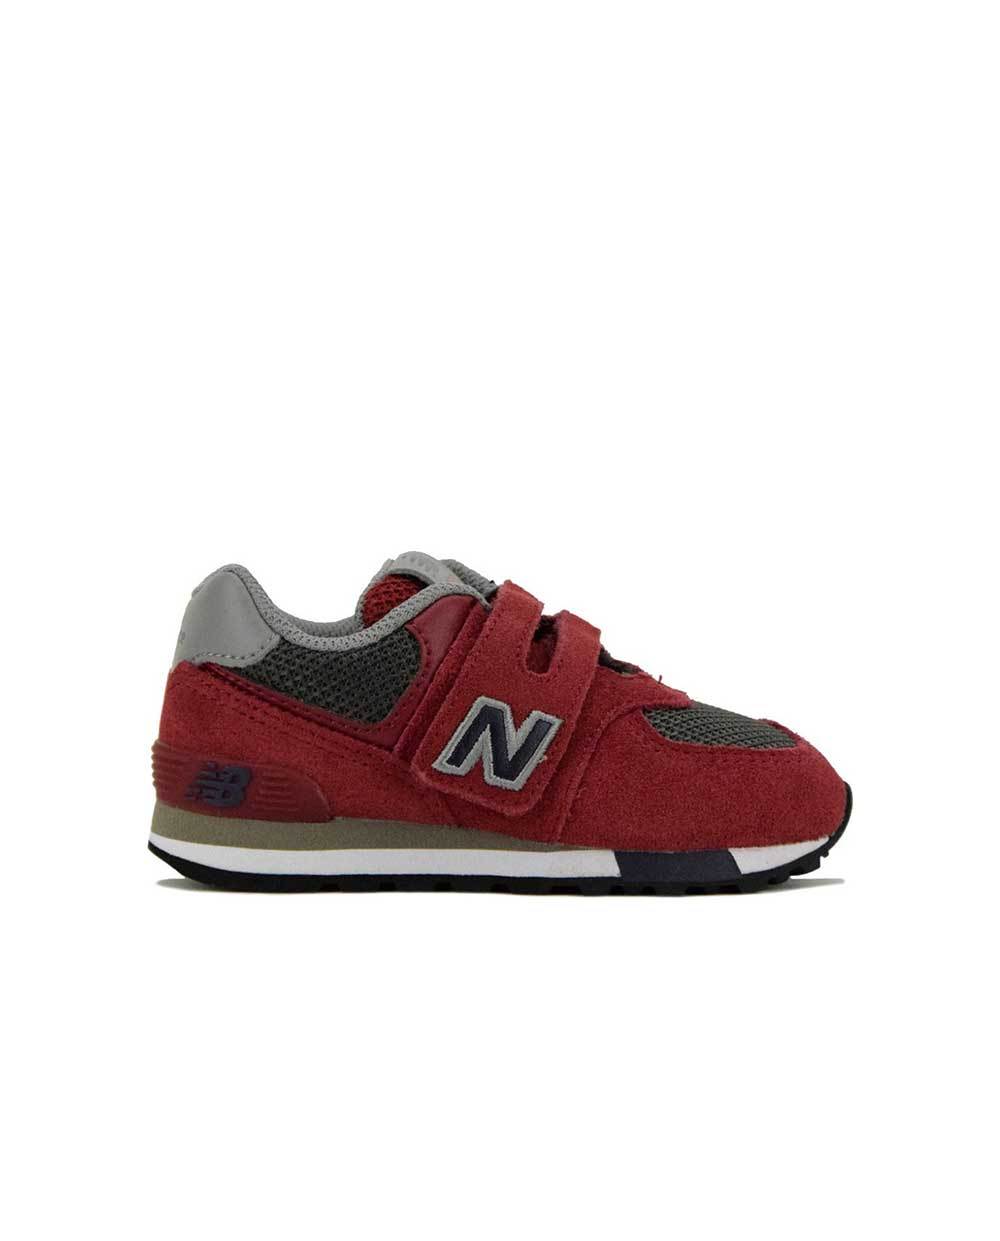 New Balance 574 Red and Black